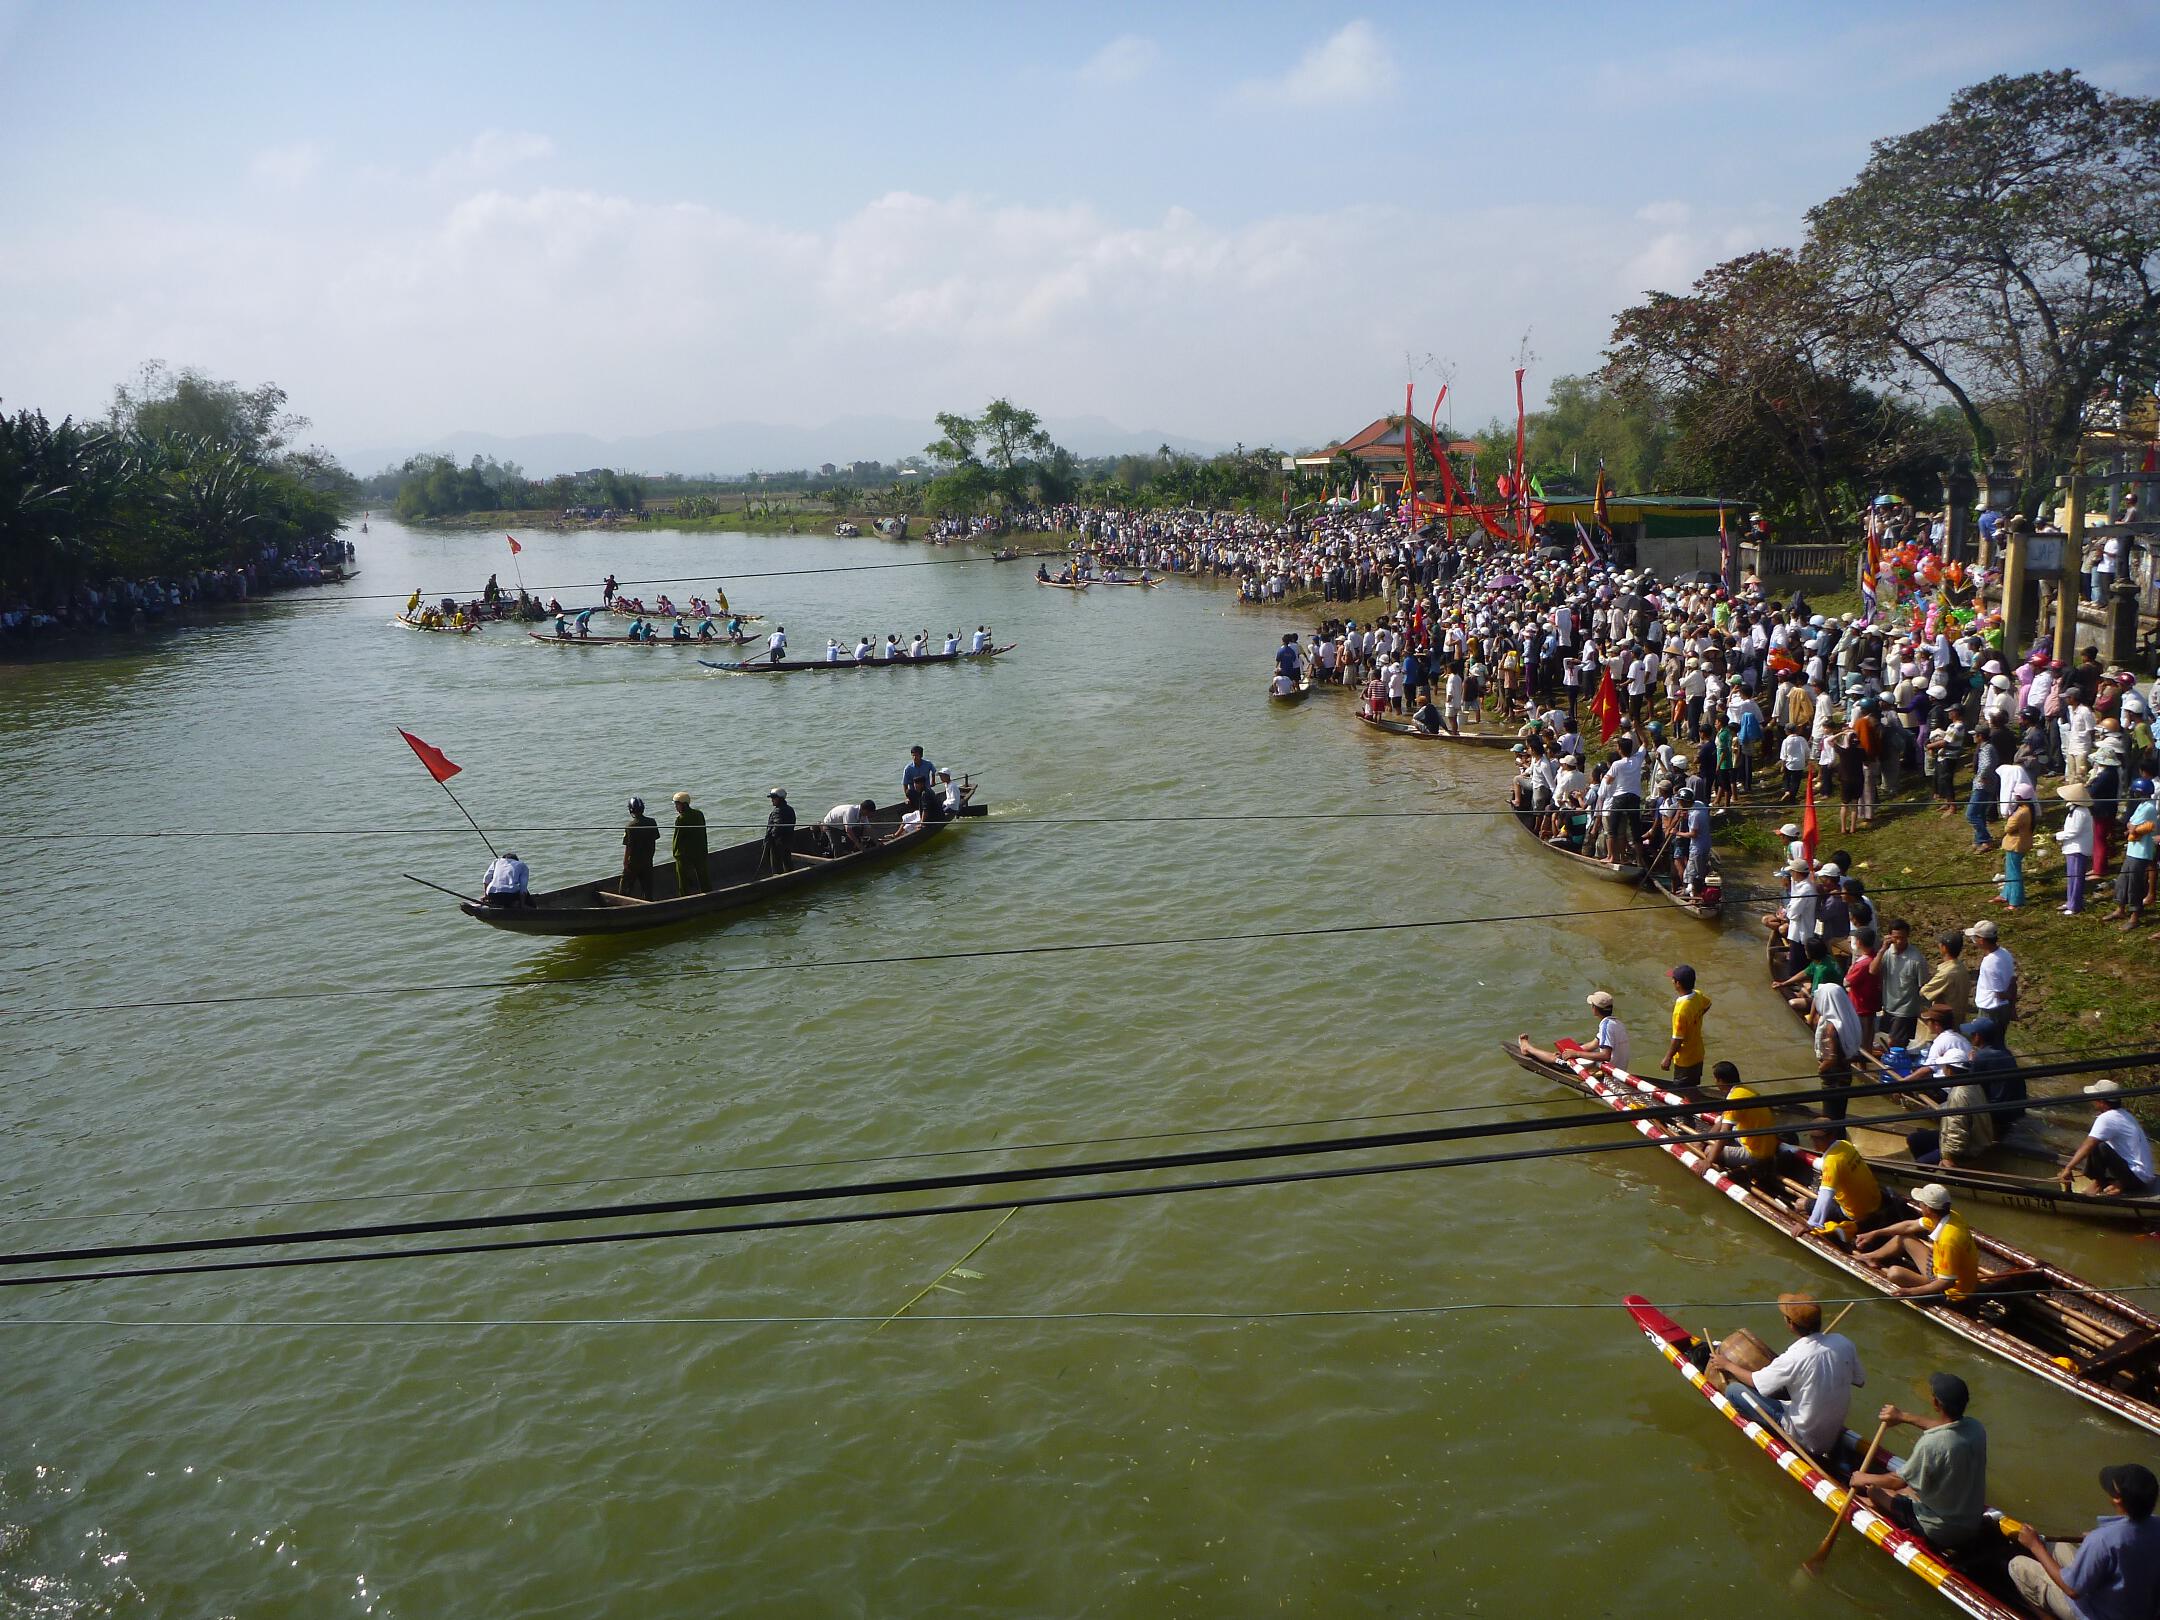 Paddle boats representing nearby towns race against each other on the Perfume River near Hue, Vietnam.